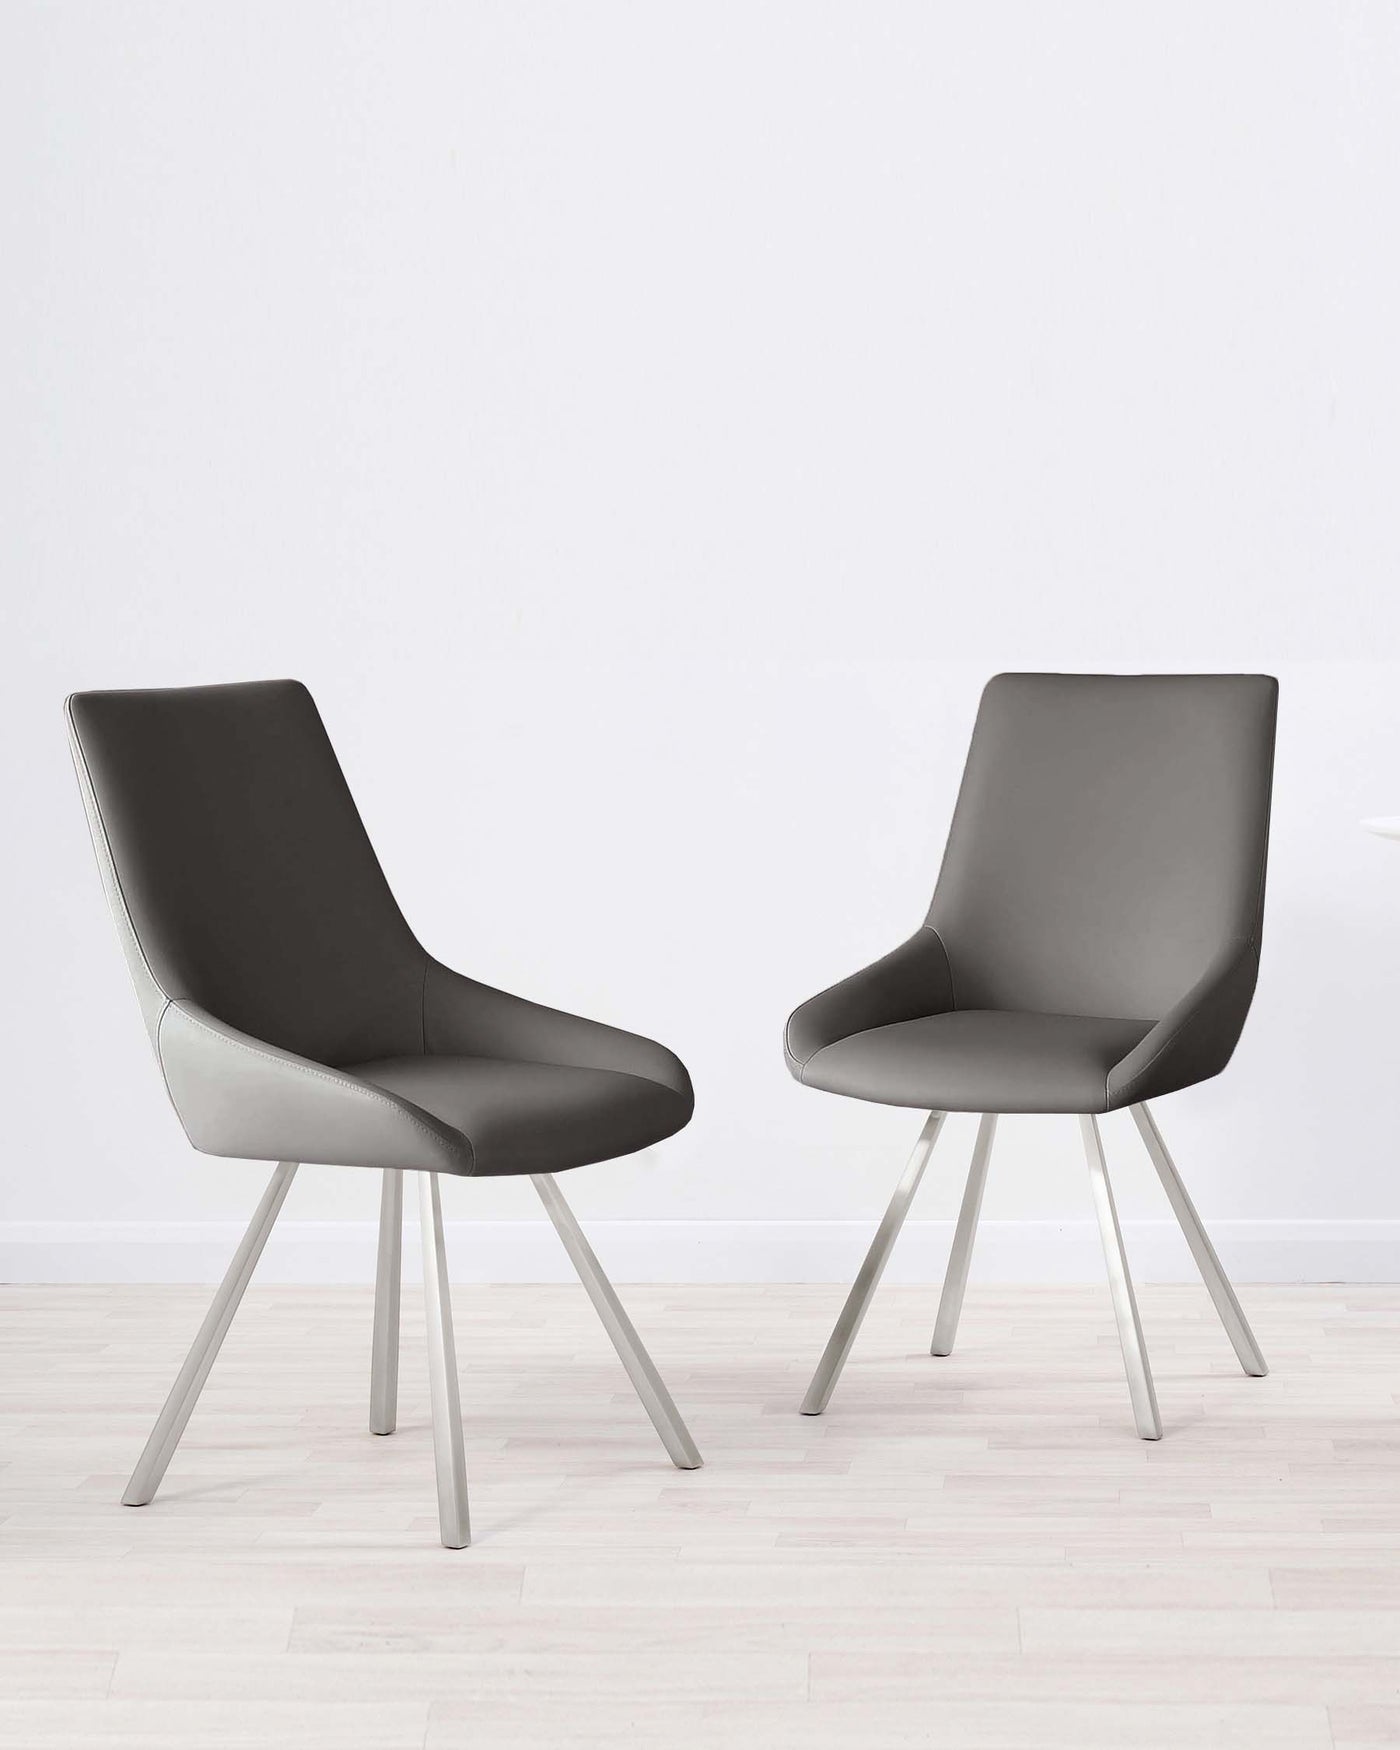 Two modern grey upholstered dining chairs with sleek metal legs, set on a light hardwood floor against a white wall background.